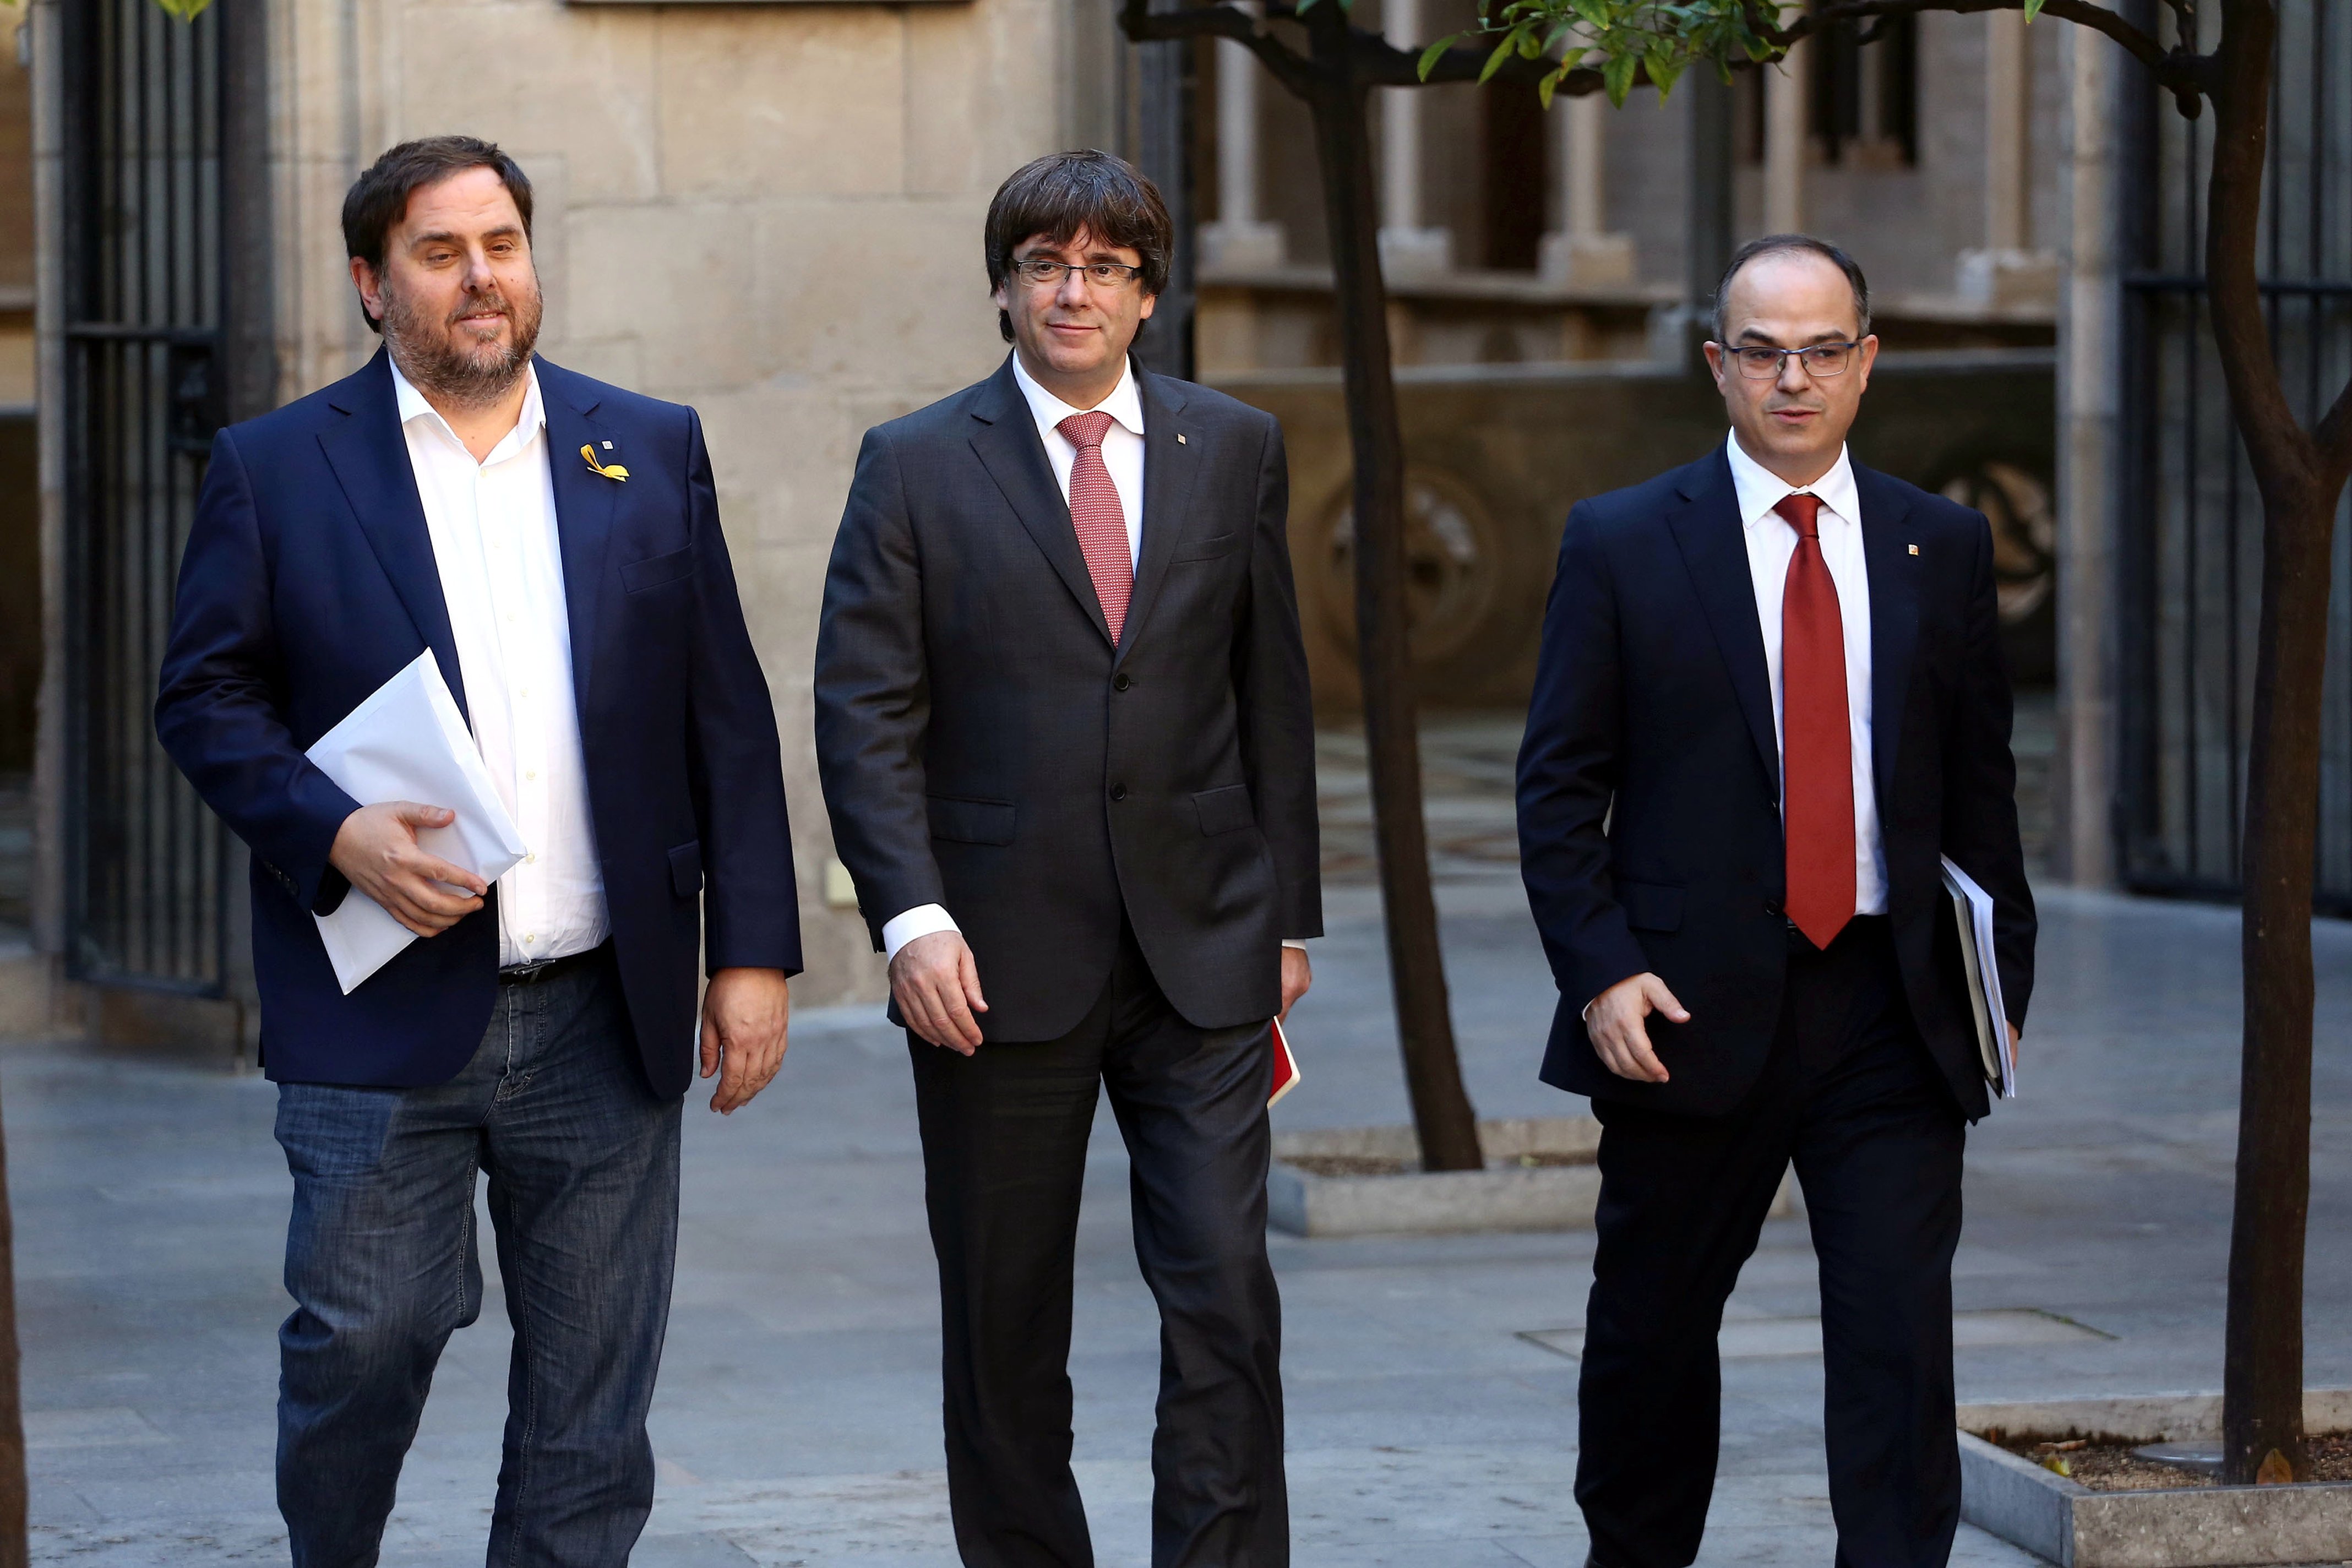 Agreement reached to proclaim the Catalan Republic